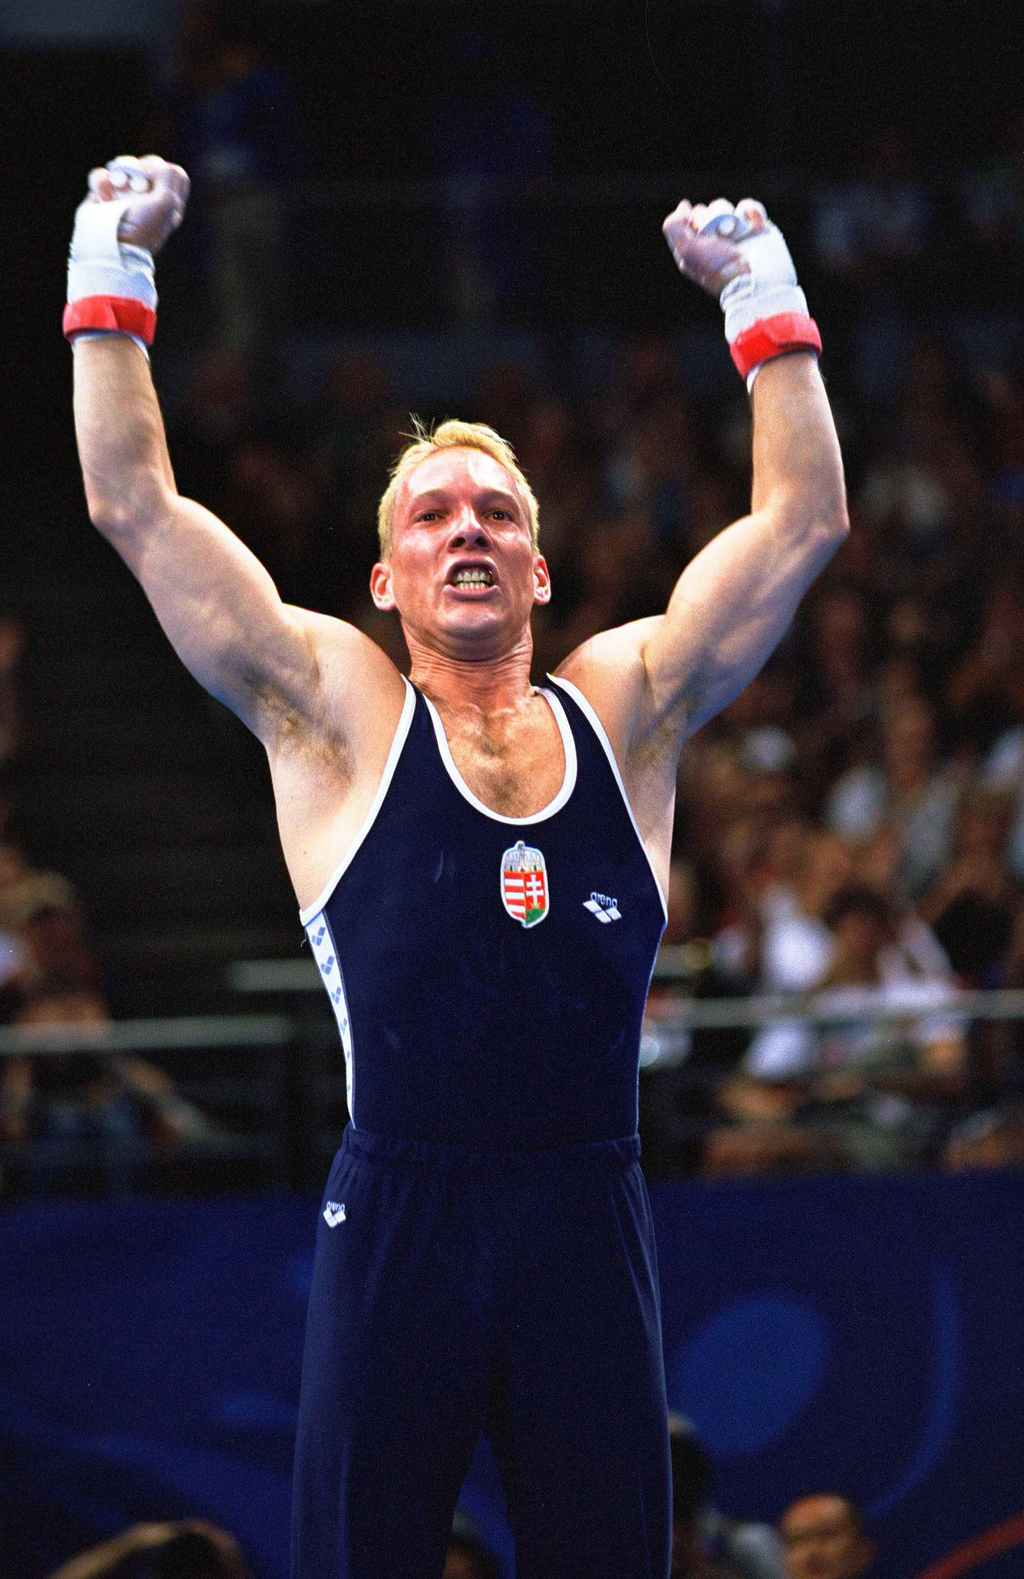 Sydney 2000 Day Nine ATHLETE ATHLETICS COMPETITION gymnastics half length OLYMPICS WINNER international sports tradition 378991 15: Szilveszter Csollany of Hungary wins the gold in the Men's Rings at the Sydney Superdome September 24, 2000 on Day Nine of 